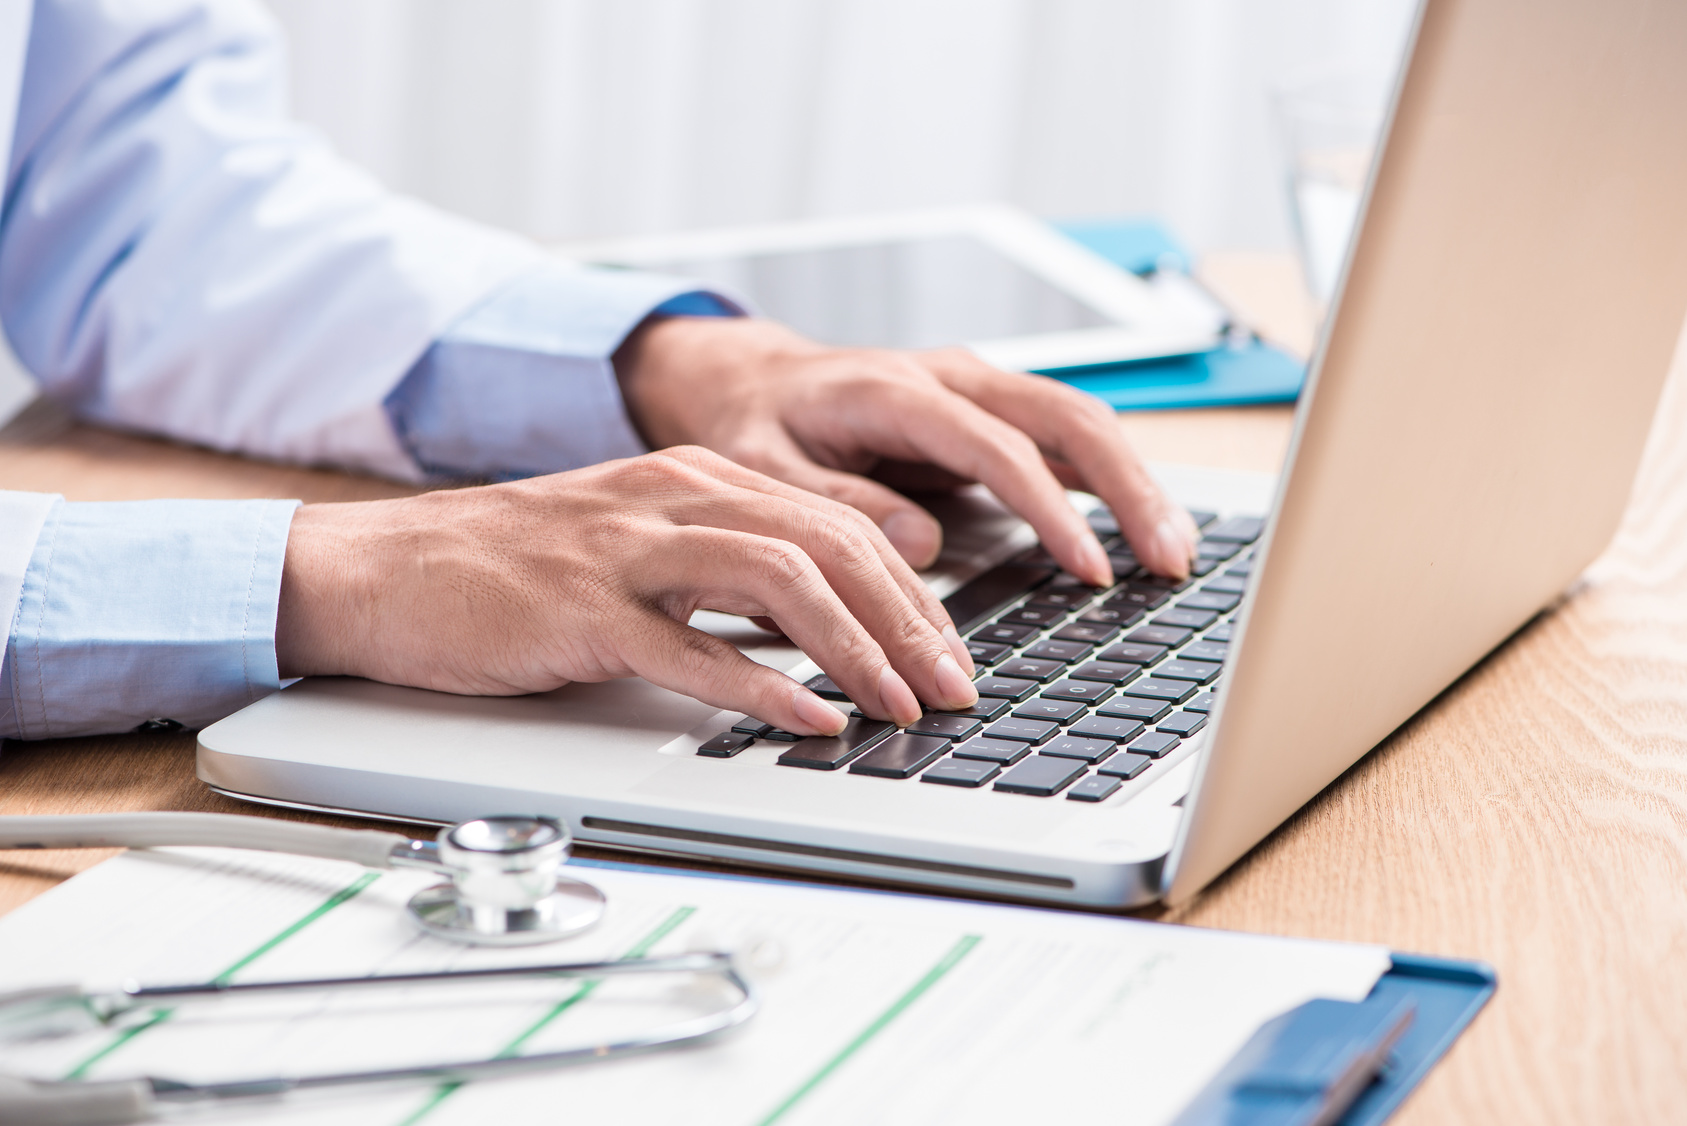 Physicians Are Plagued by EHR, but Few Are Asking Them How to Improve It